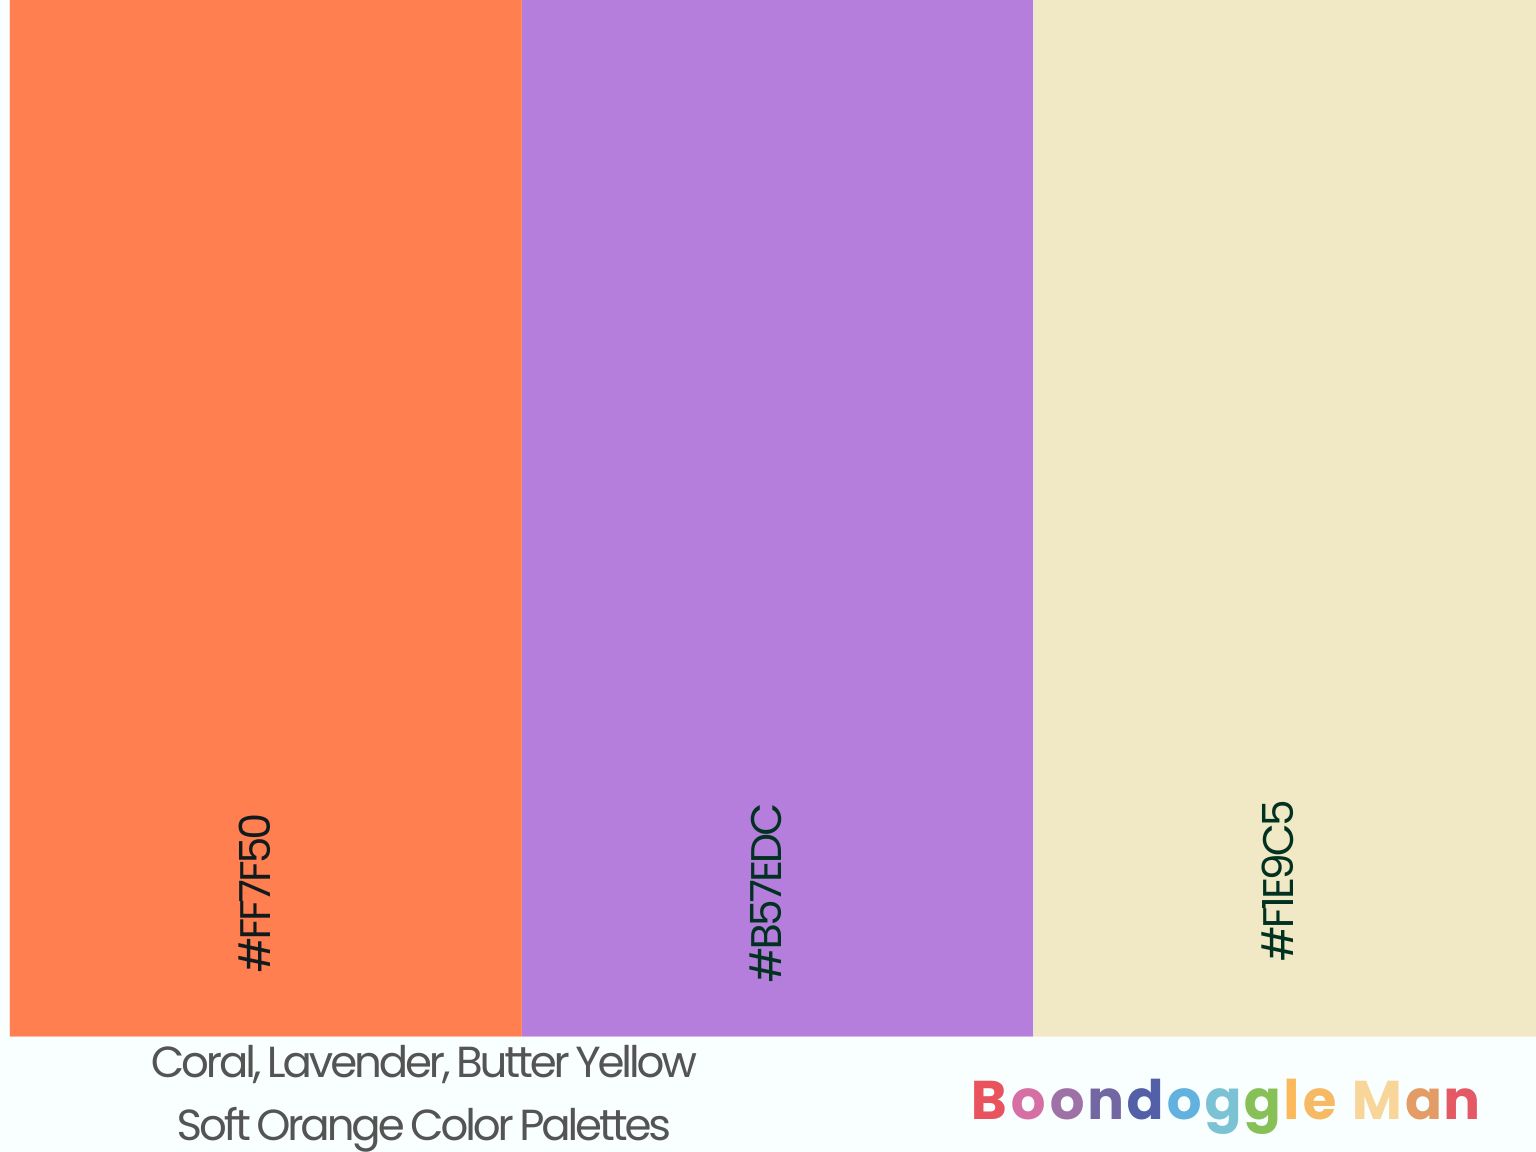 Coral, Lavender, Butter Yellow